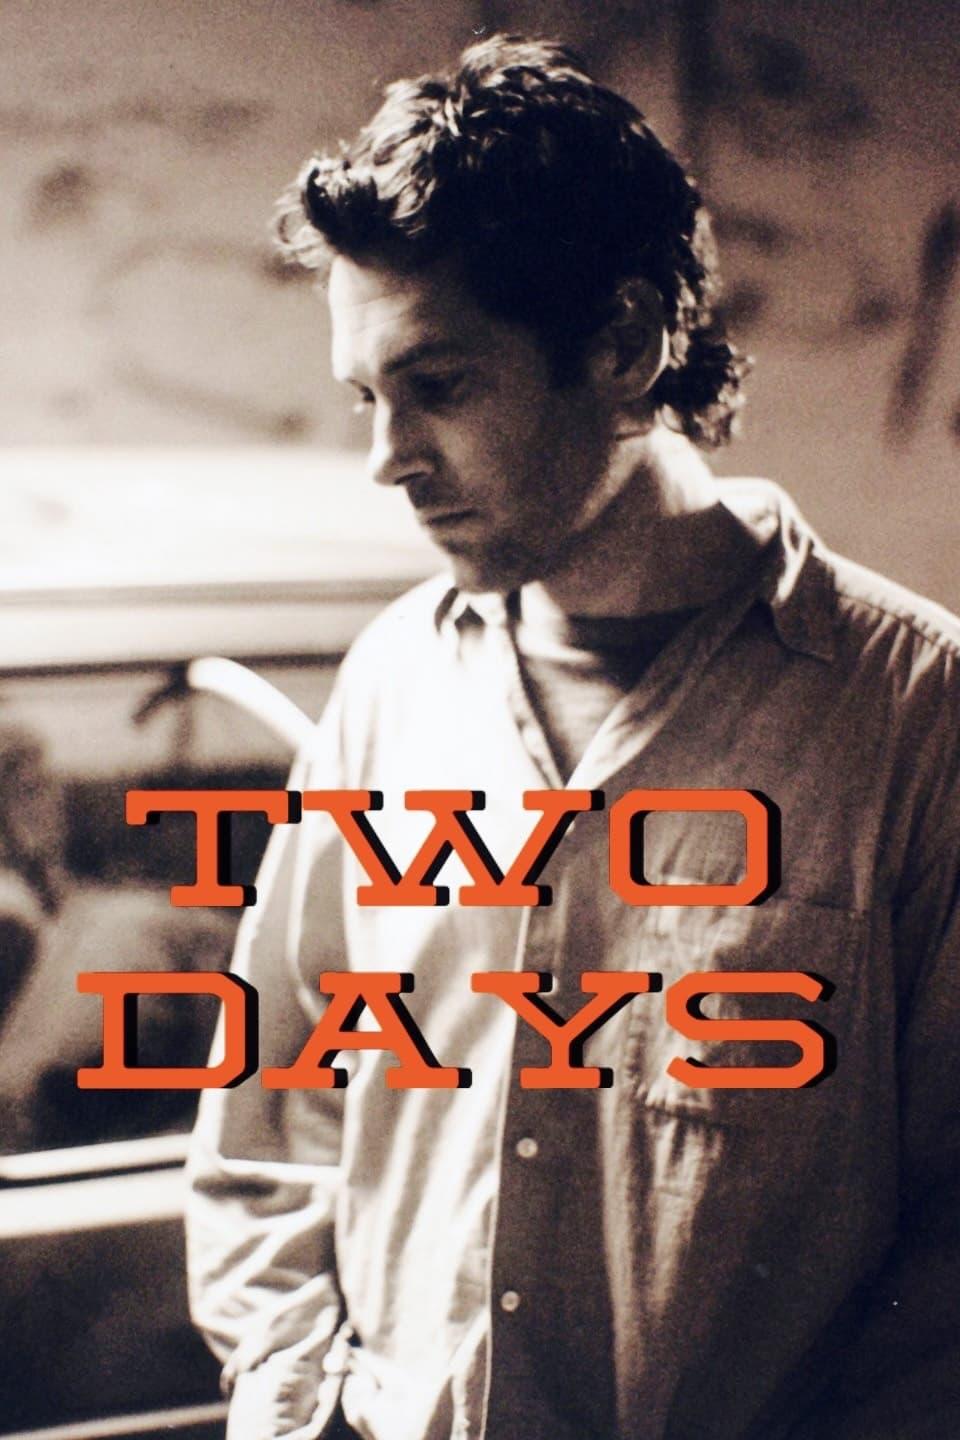 Two Days poster